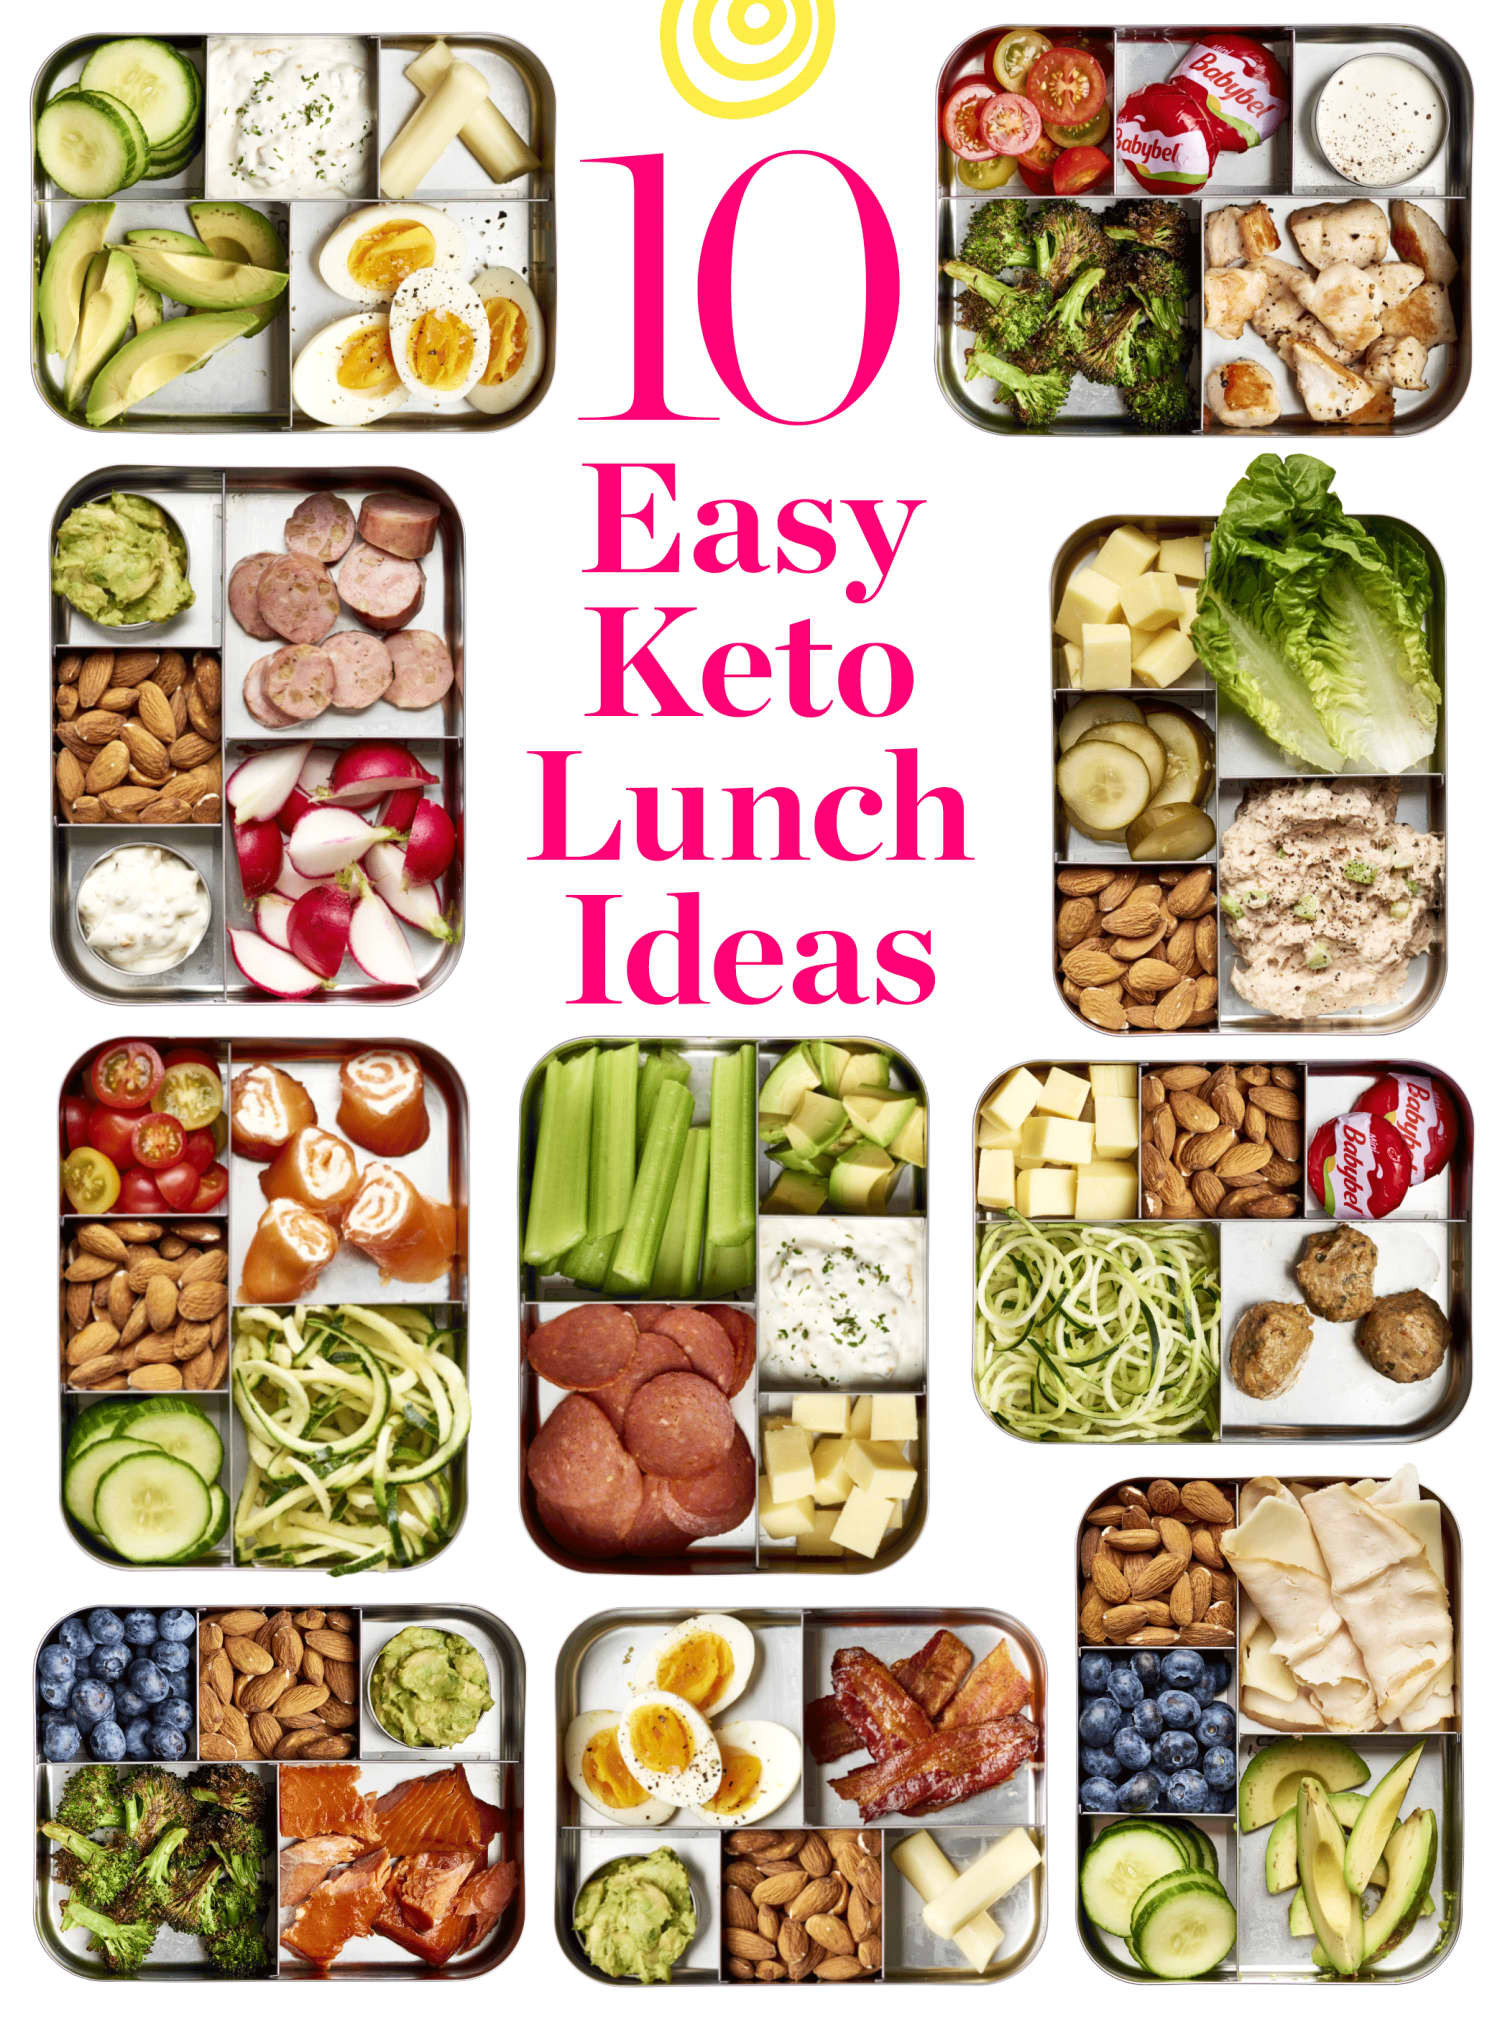 Vegetarian Keto Lunches For Work
 10 Easy Keto Lunch Ideas with Net Carb Counts